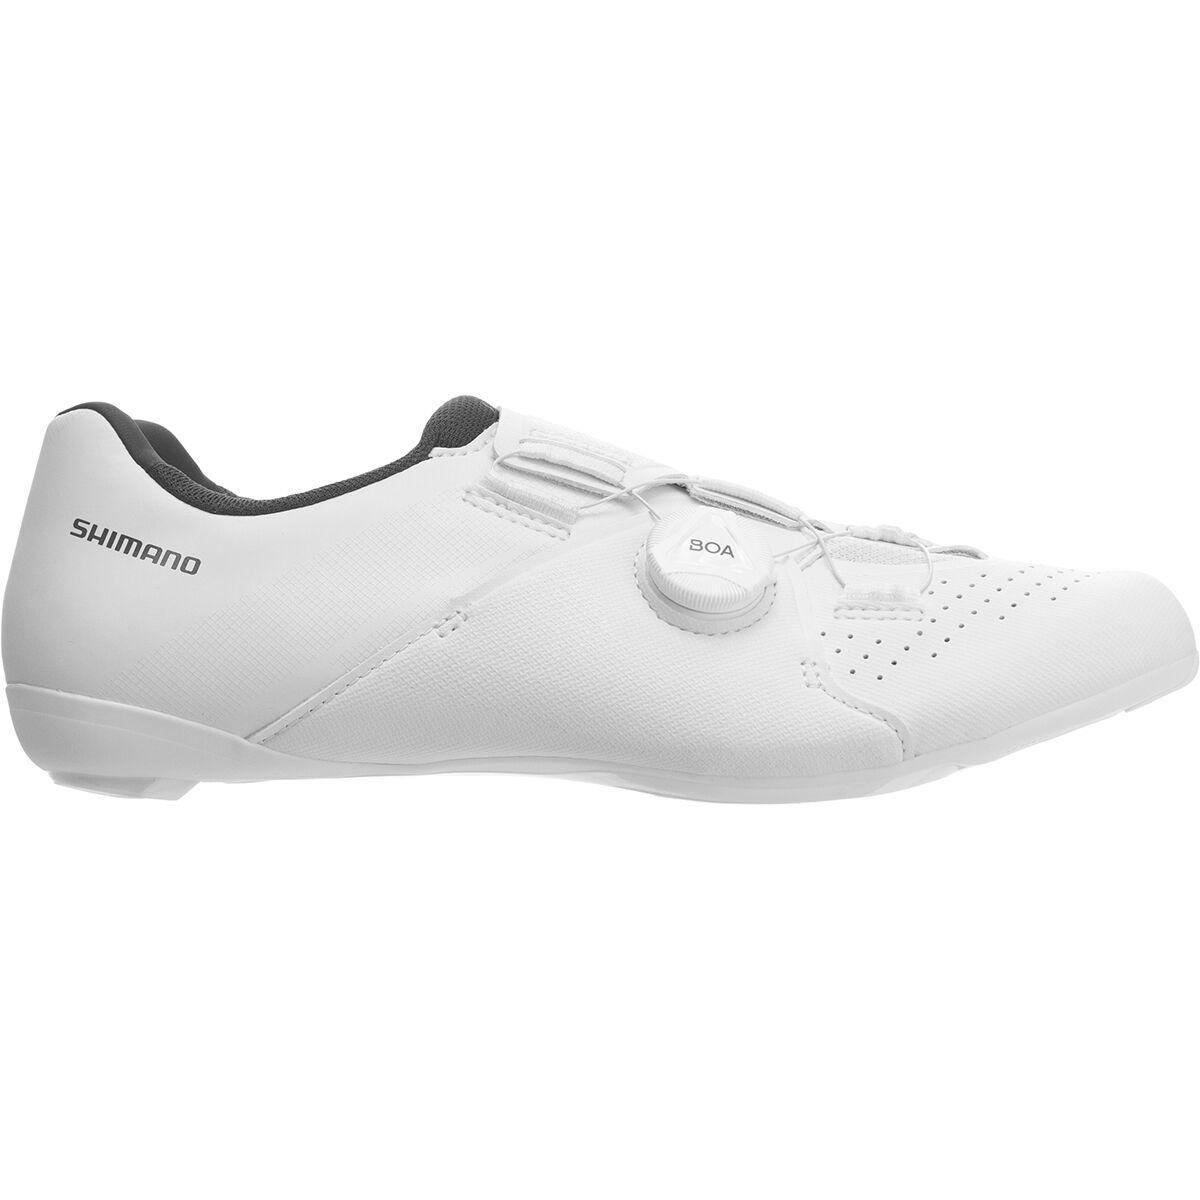 Shimano RC3 Road Shoes escapeauthority